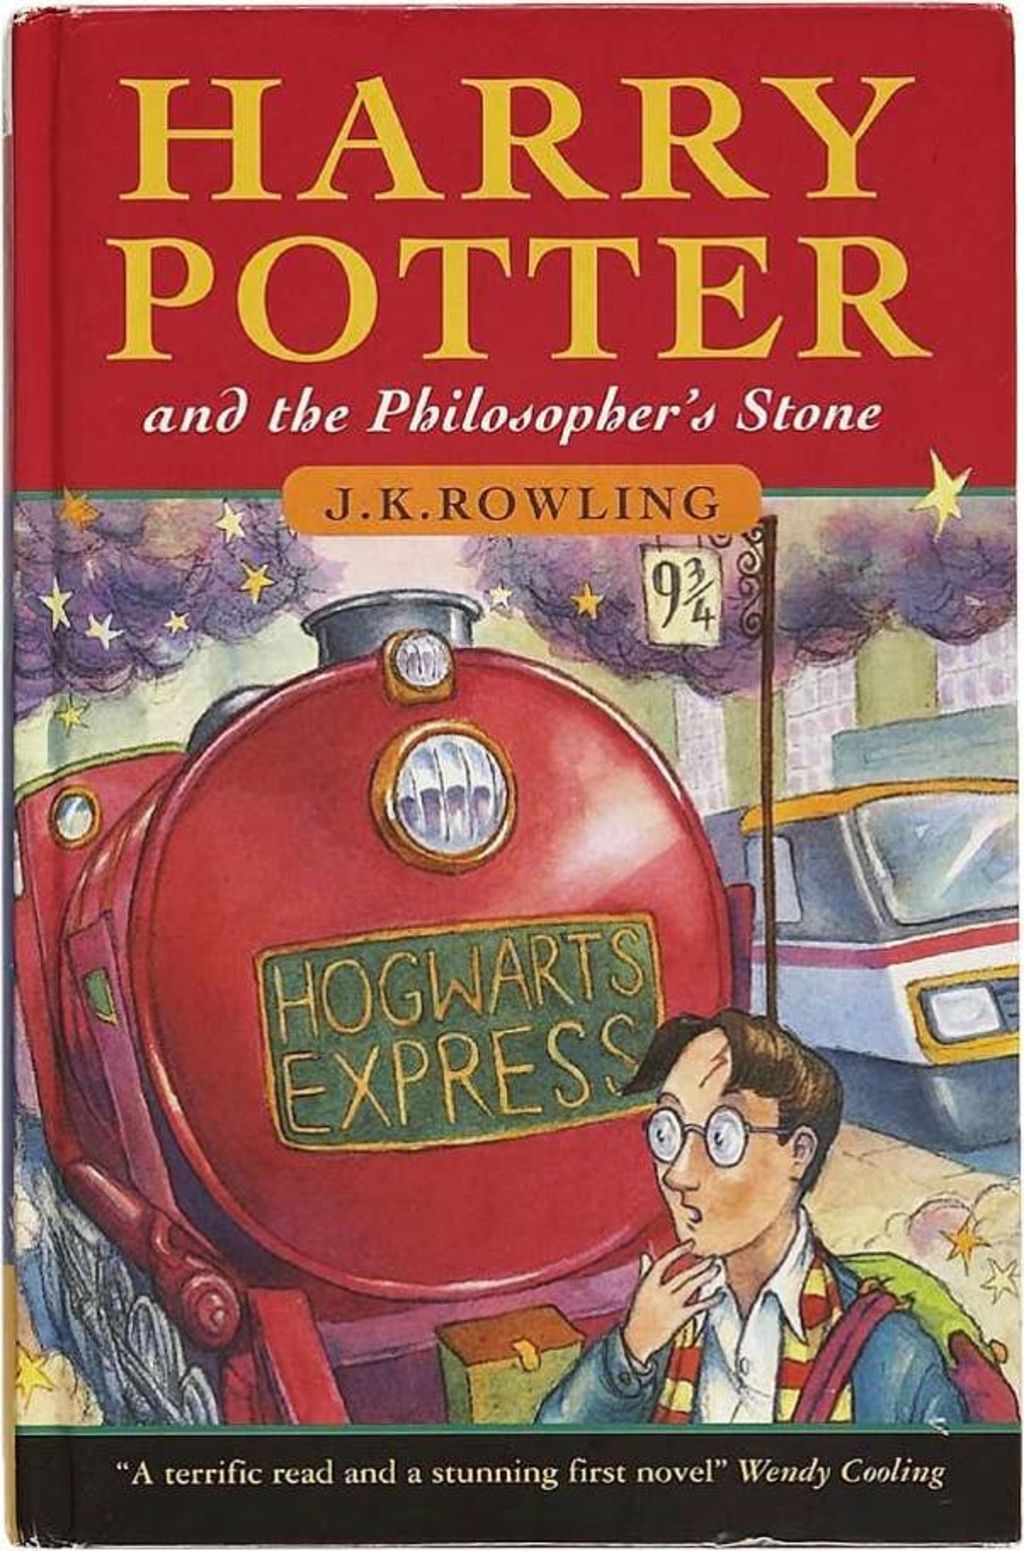 Collector's items, such as early editions of Harry Potter, are highly sought after online.